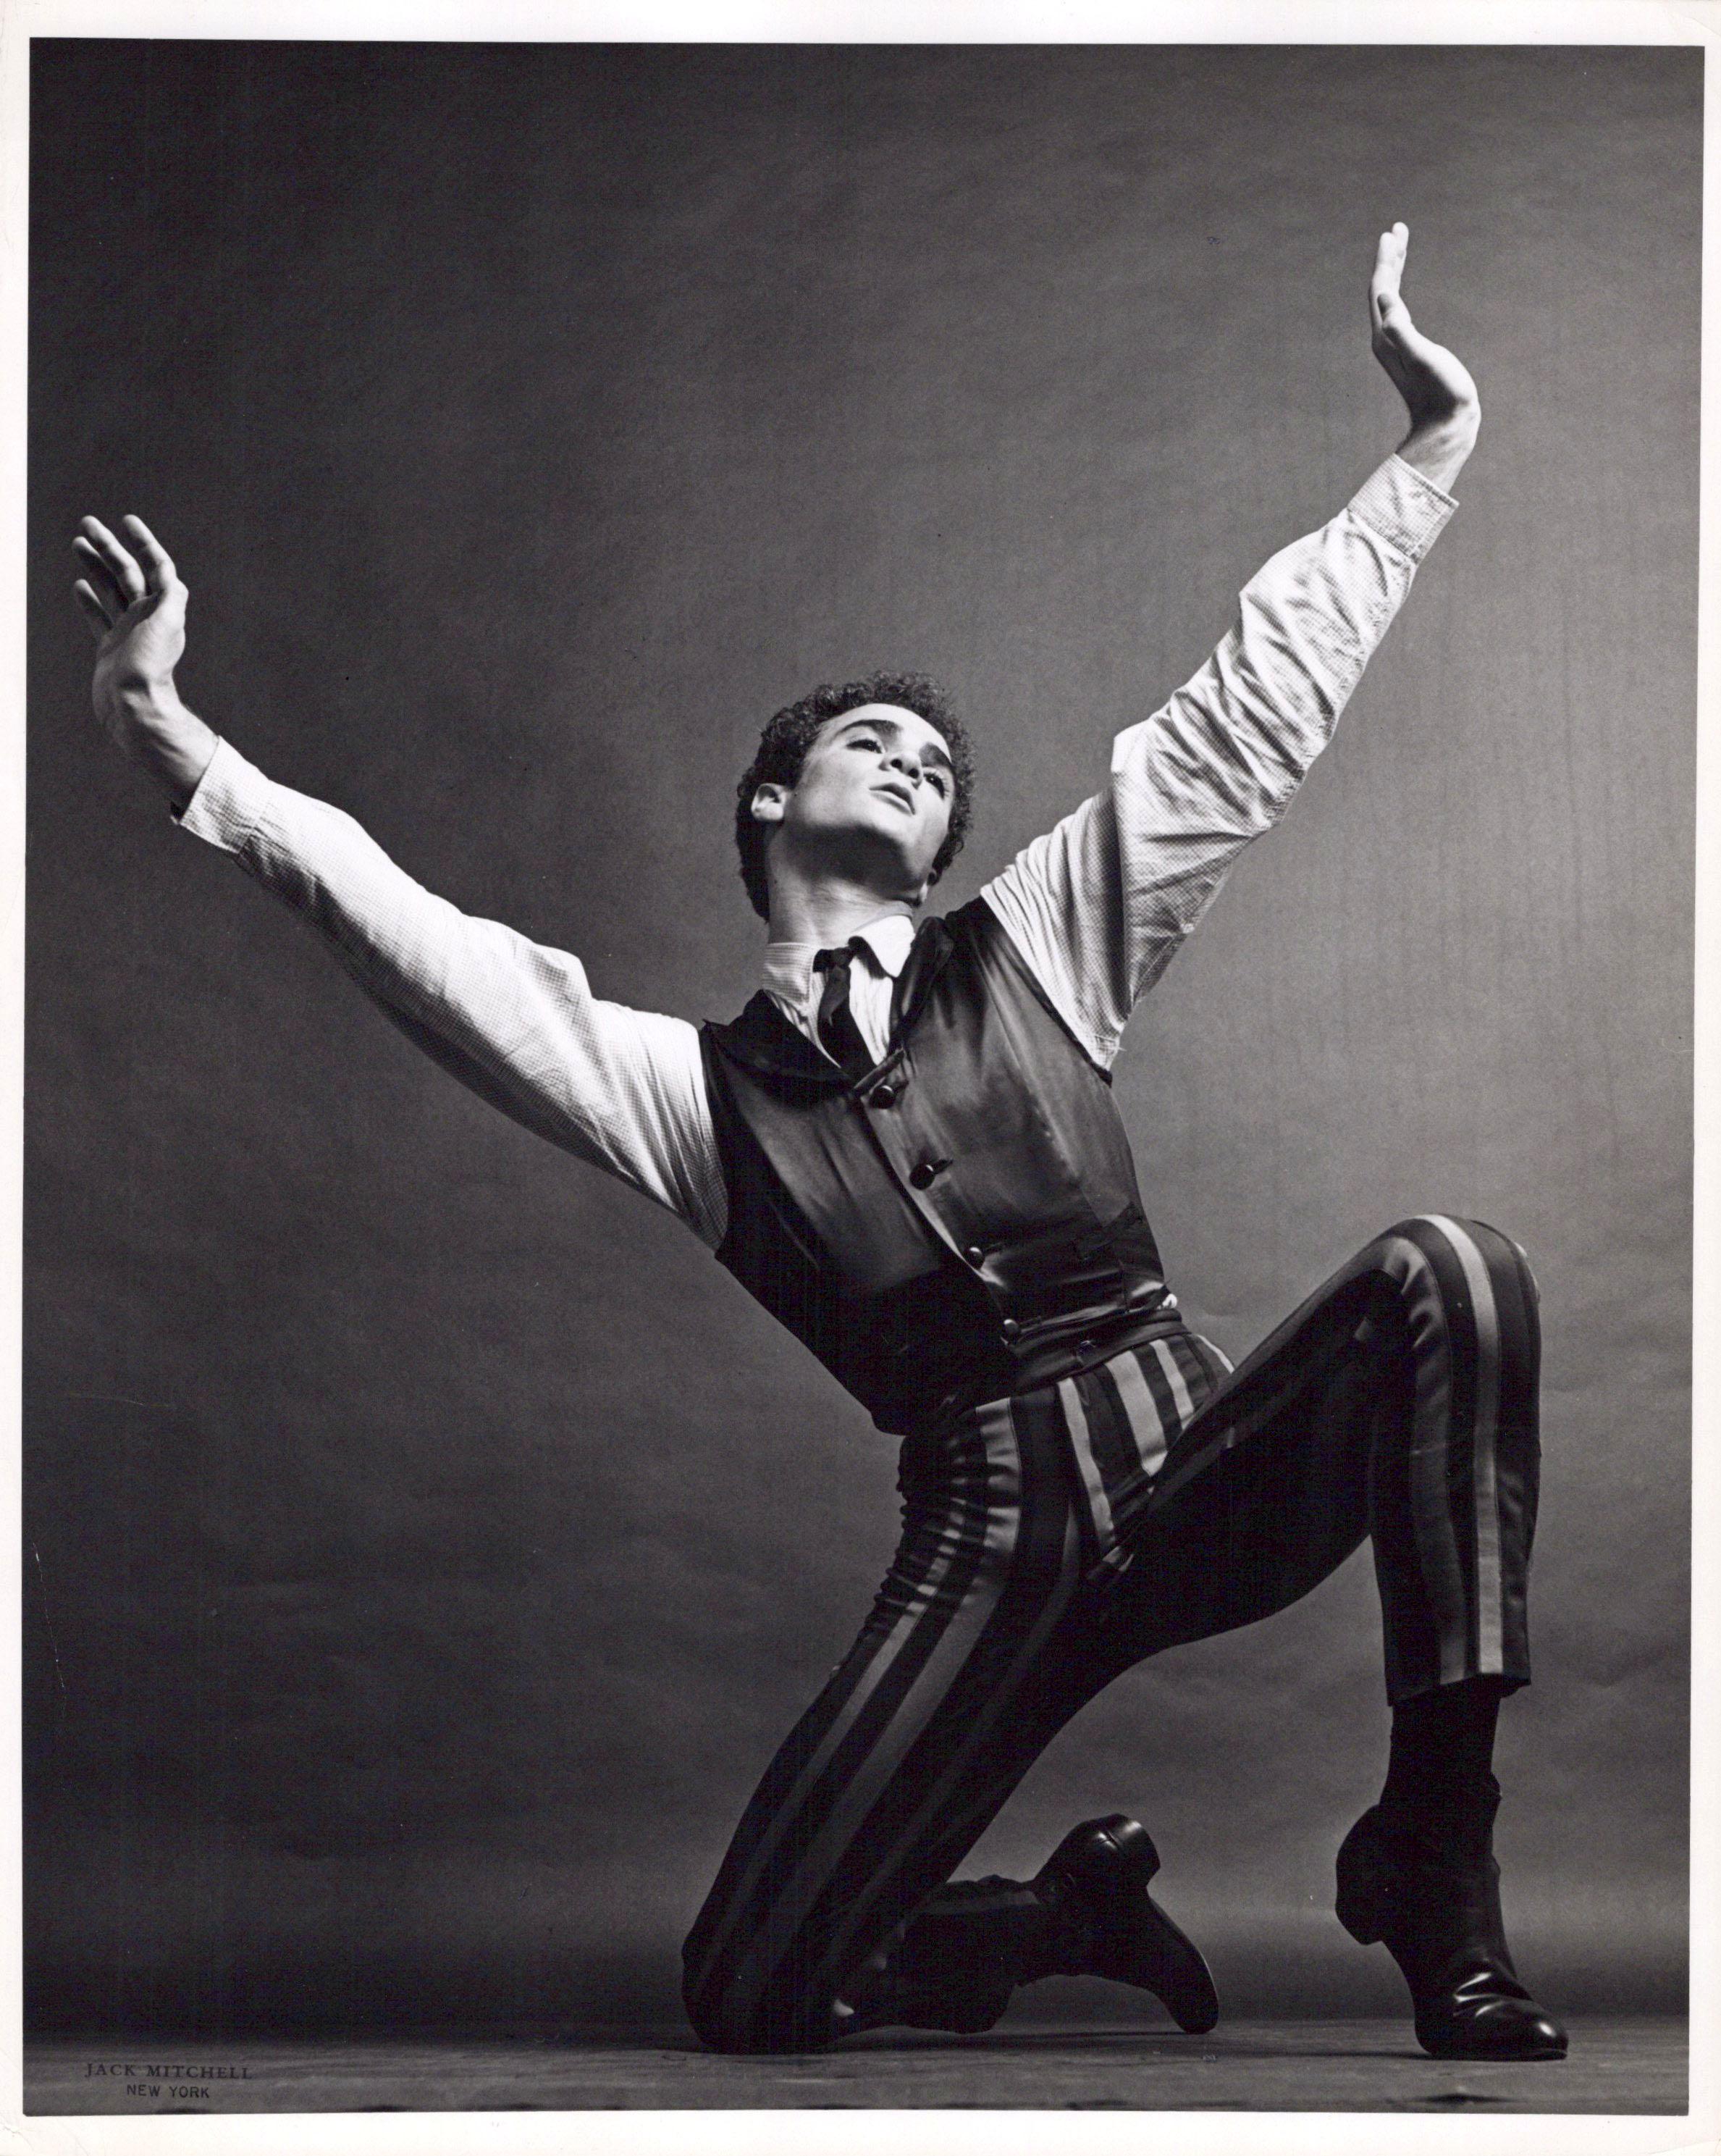 Jack Mitchell Black and White Photograph - Dancer & Choreographer Louis Falco Performing